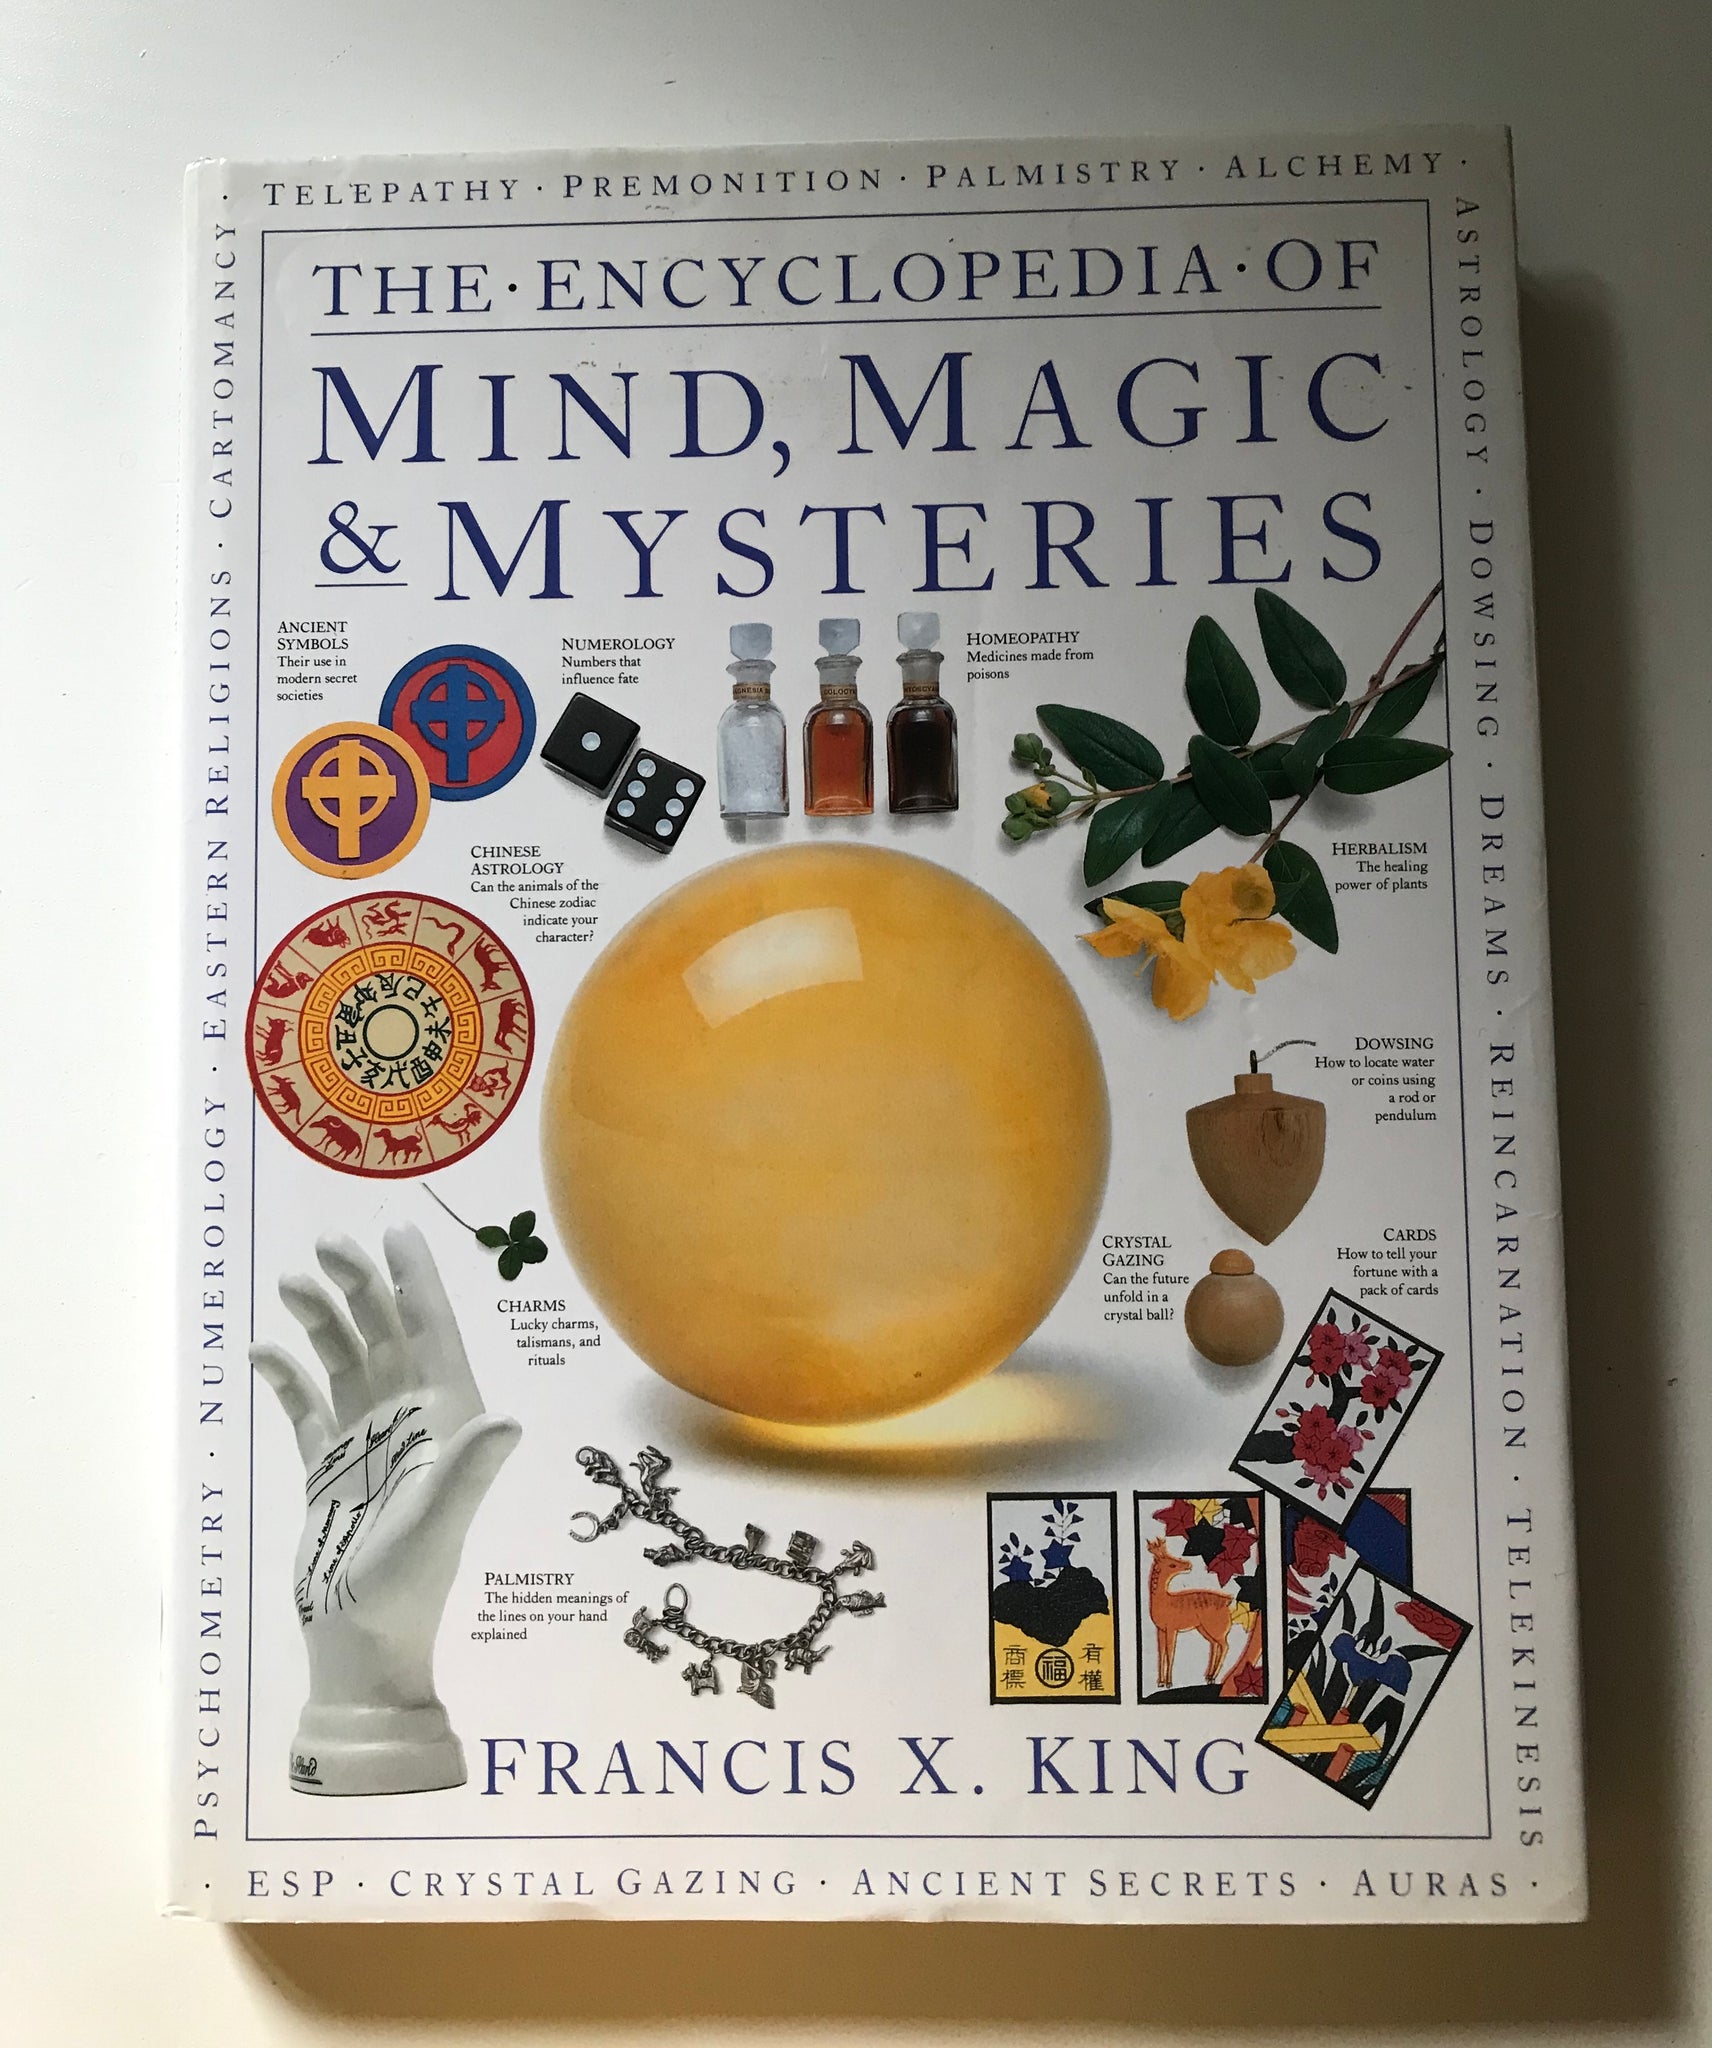 Francis X. King - The Encyclopedia of mind, magic & mysteries